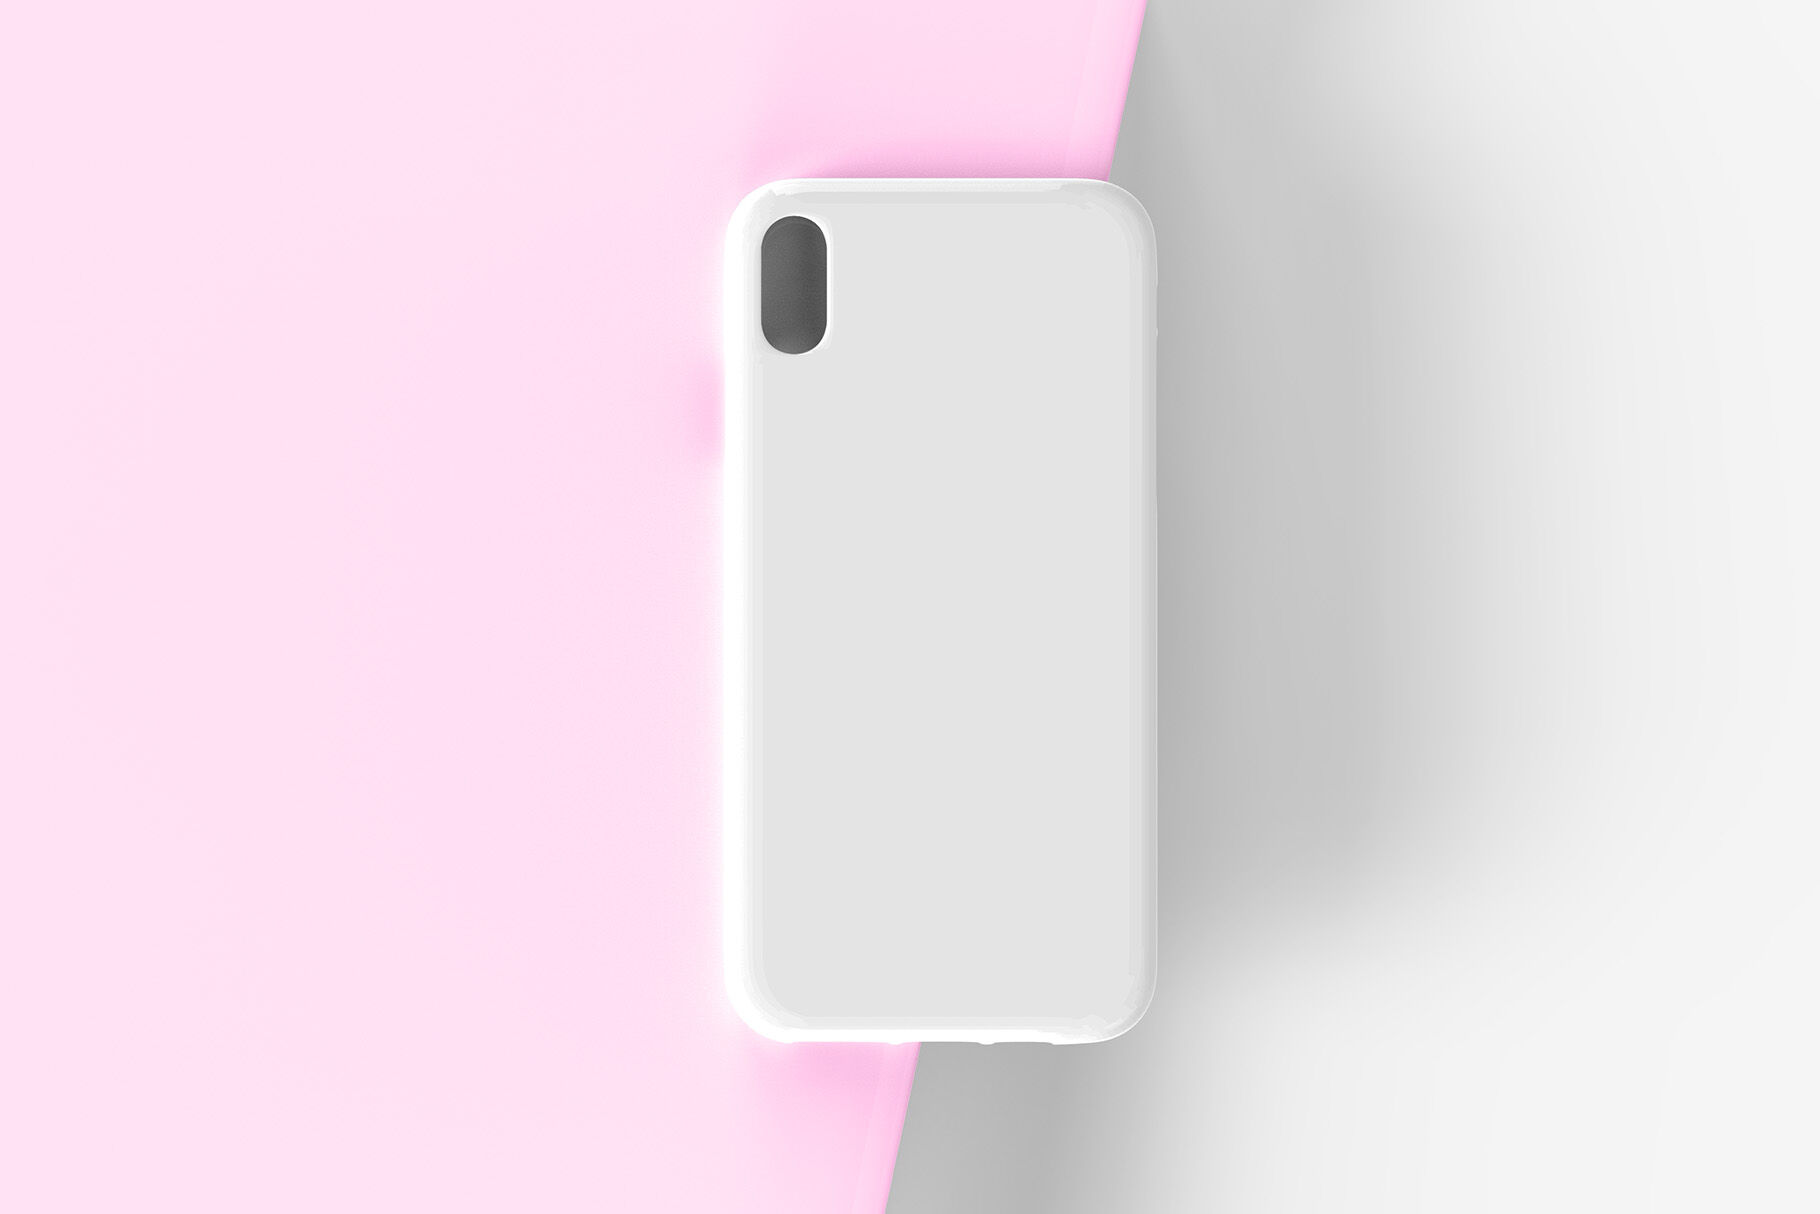 Download Phone Case Mockup - 8 Views By Illusiongraphic ...